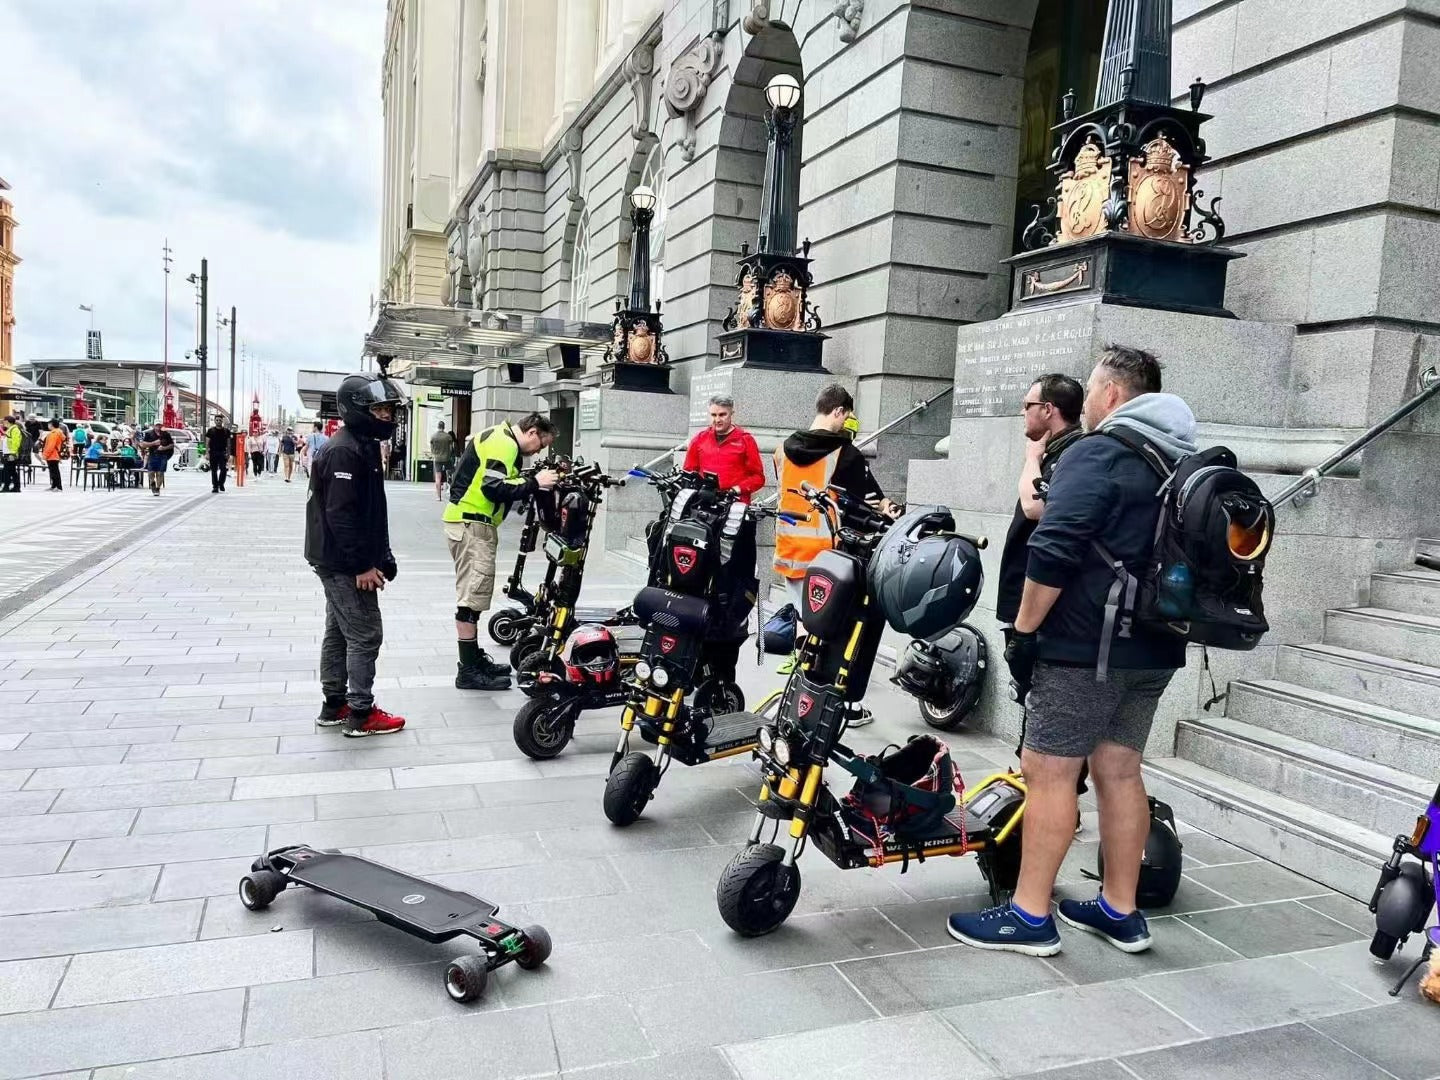 A group of individuals with electric scooters and skateboards congregating on a city sidewalk, engaged in conversation and examining their vehicles.